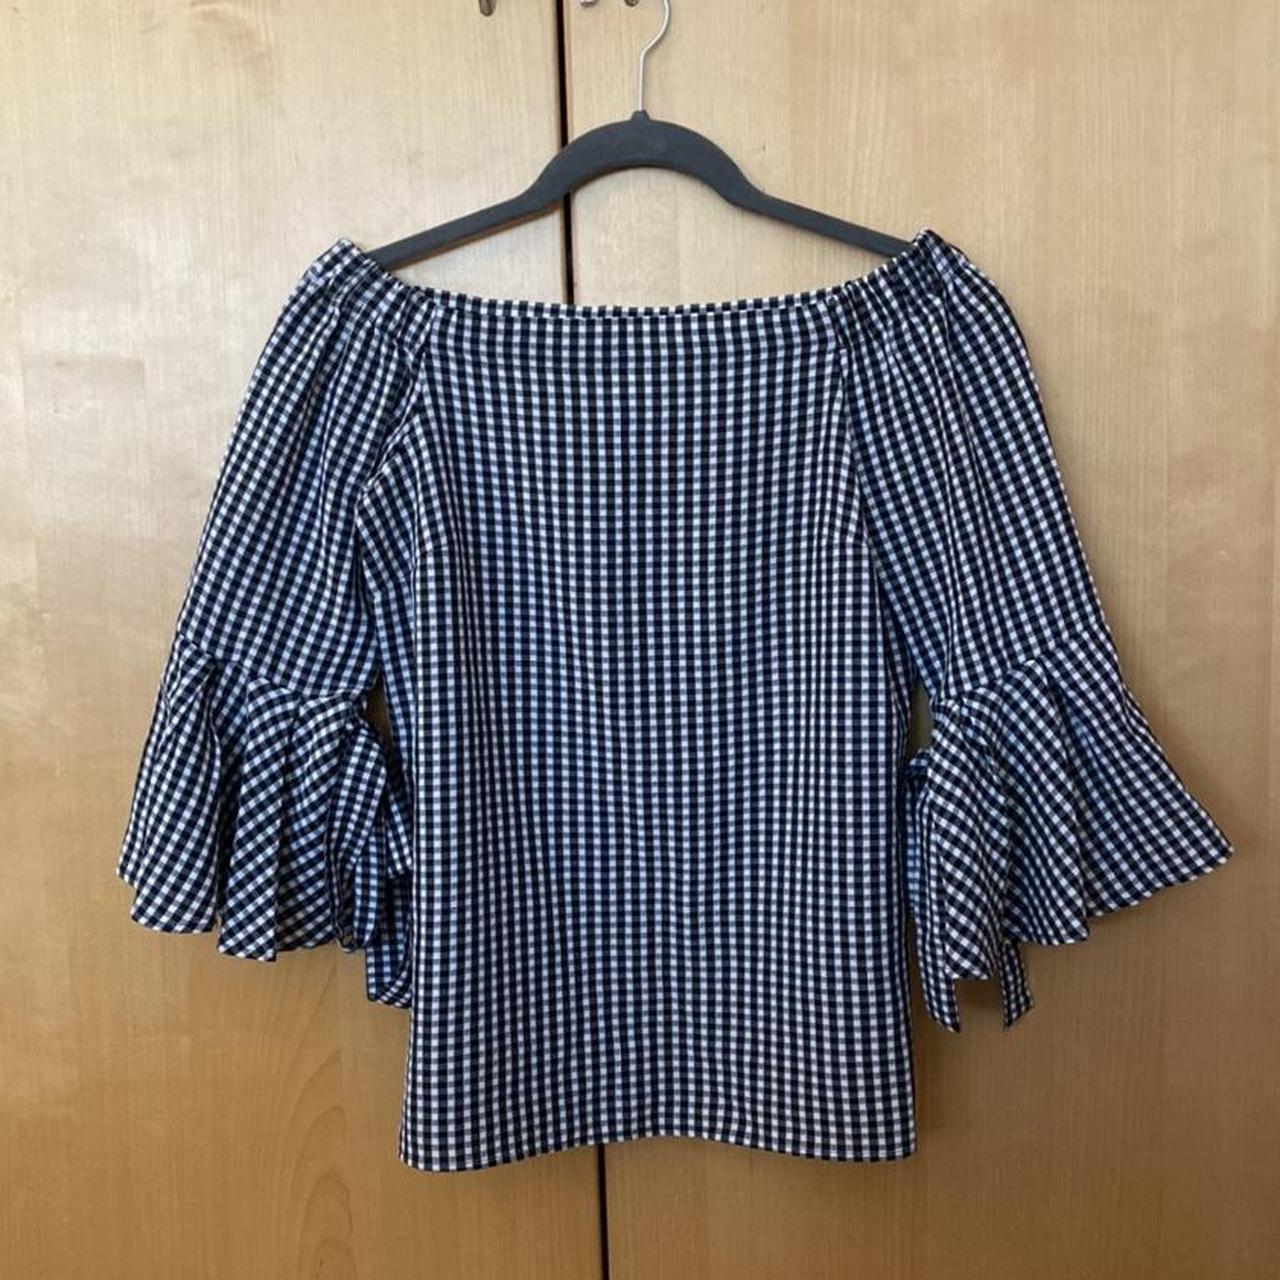 H&M Black and White Gingham Bardot Blouse in size... - Depop